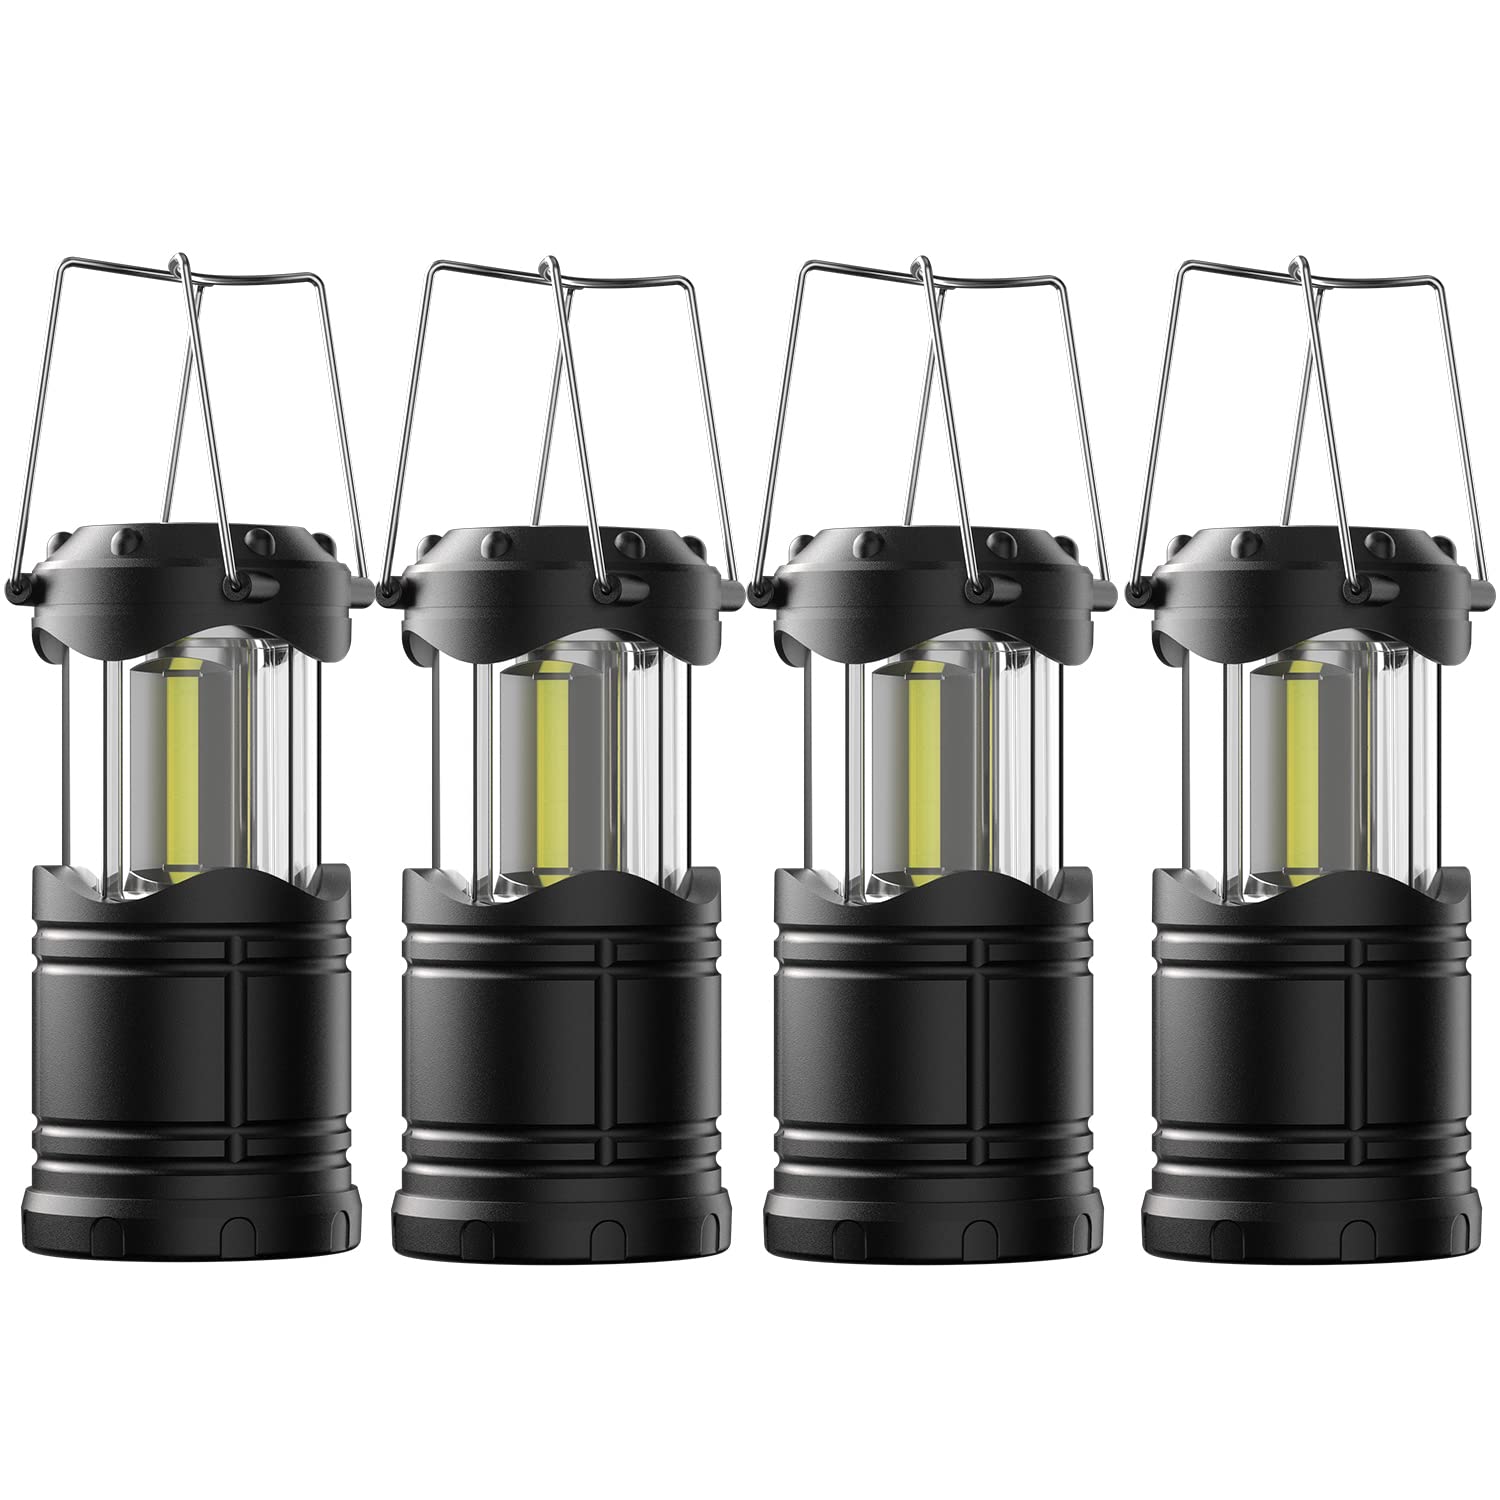 Lichamp 4 Pack Led Camping Lanterns, Battery Powered Camping Lights Cob  Super Bright Collapsible Flashlight Portable Emergency S